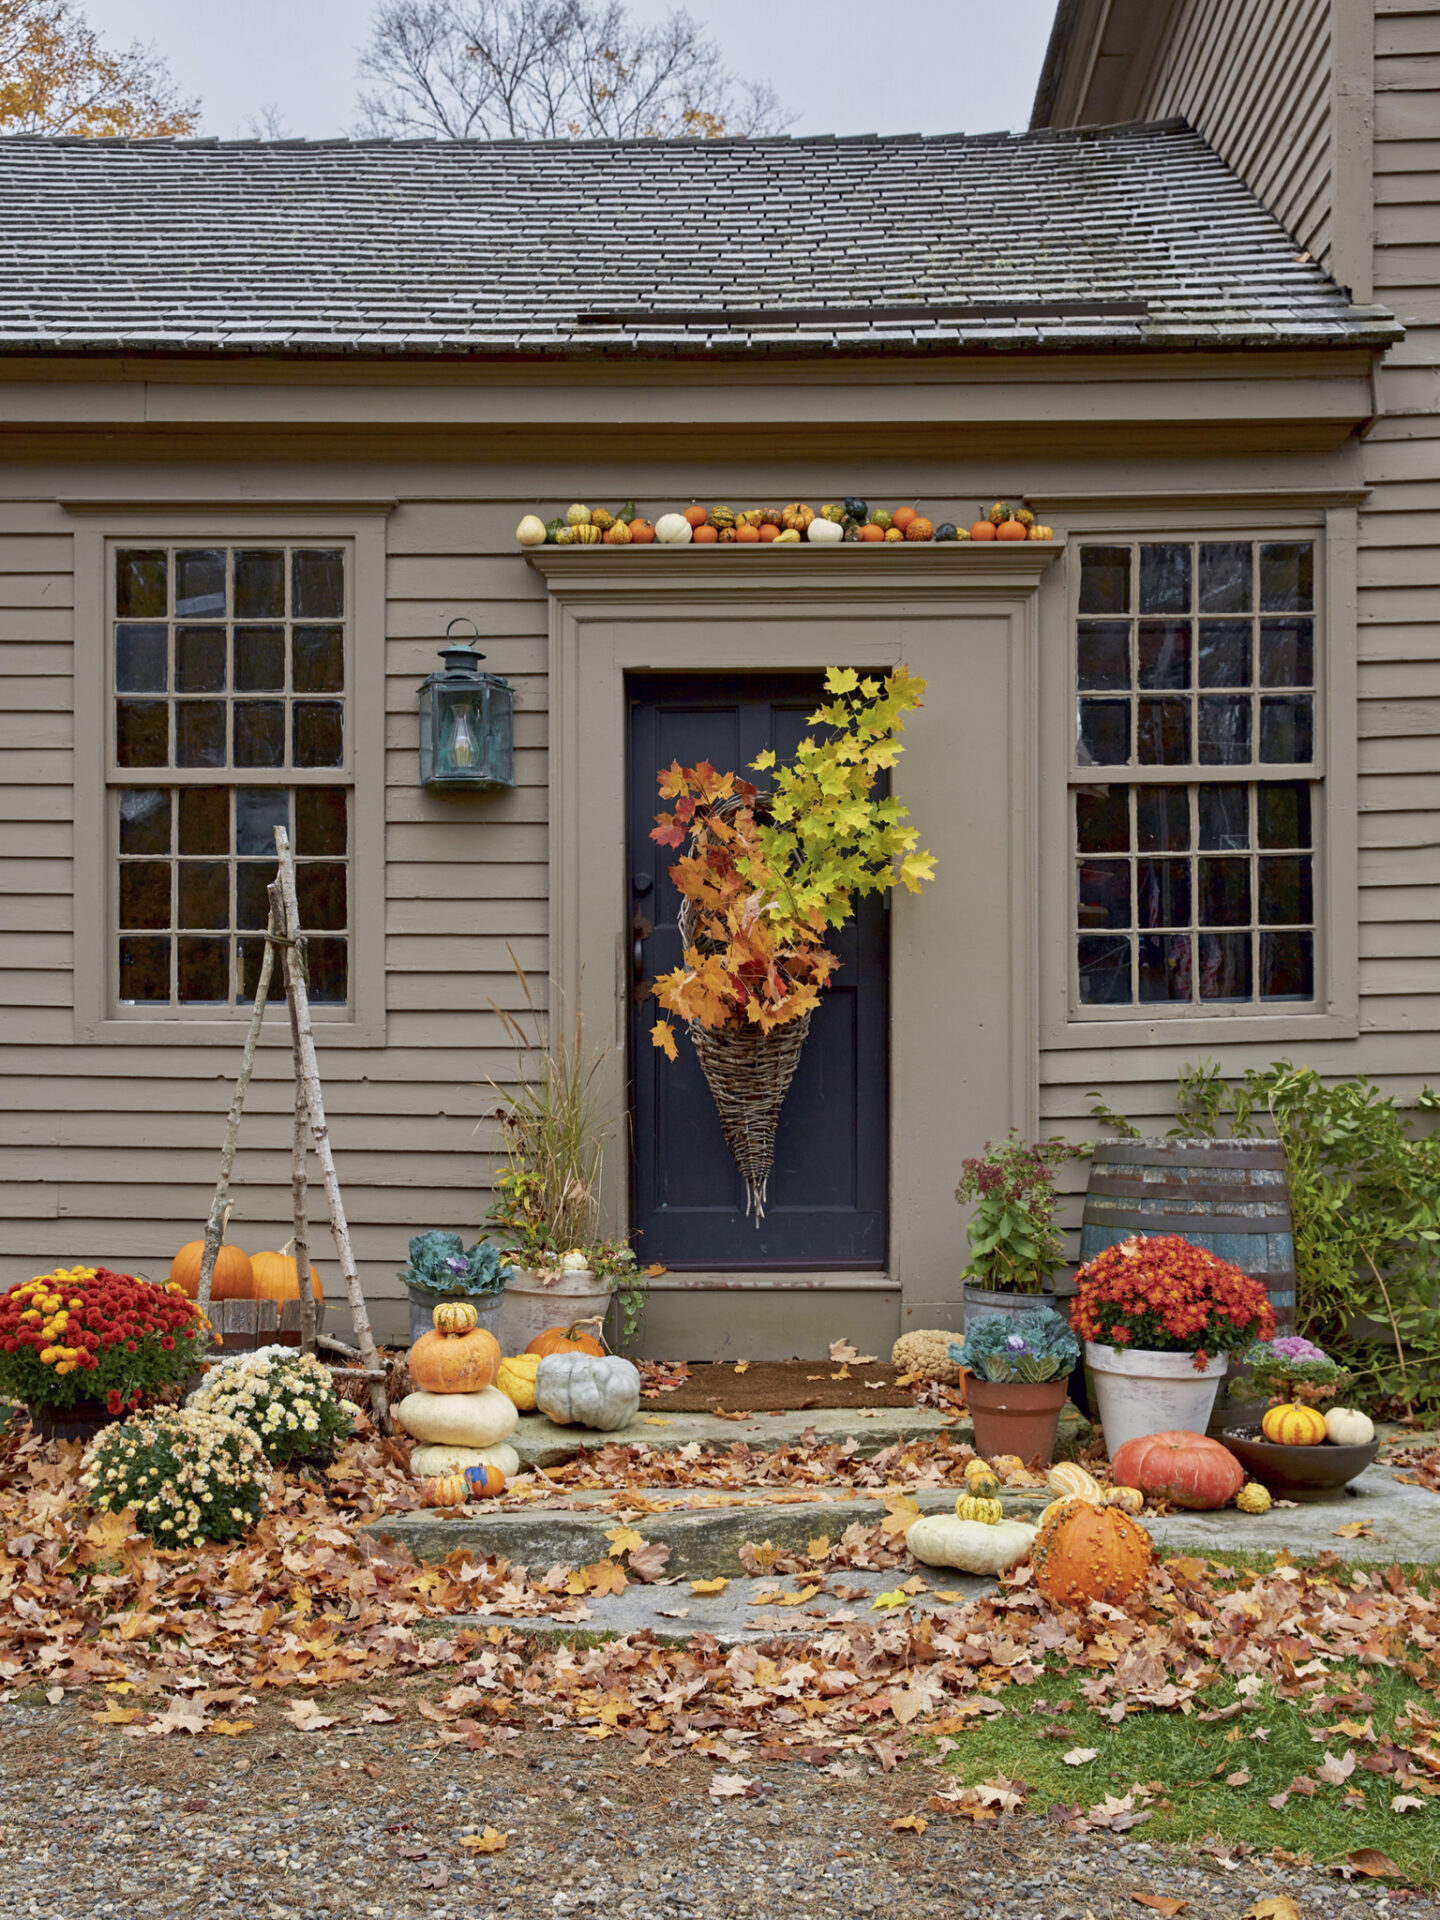 Fall splendor at the front door in Nora Murphy COUNTRY HOUSE LIVING. #newenglandstyle #americancountry #americanfarmhouse